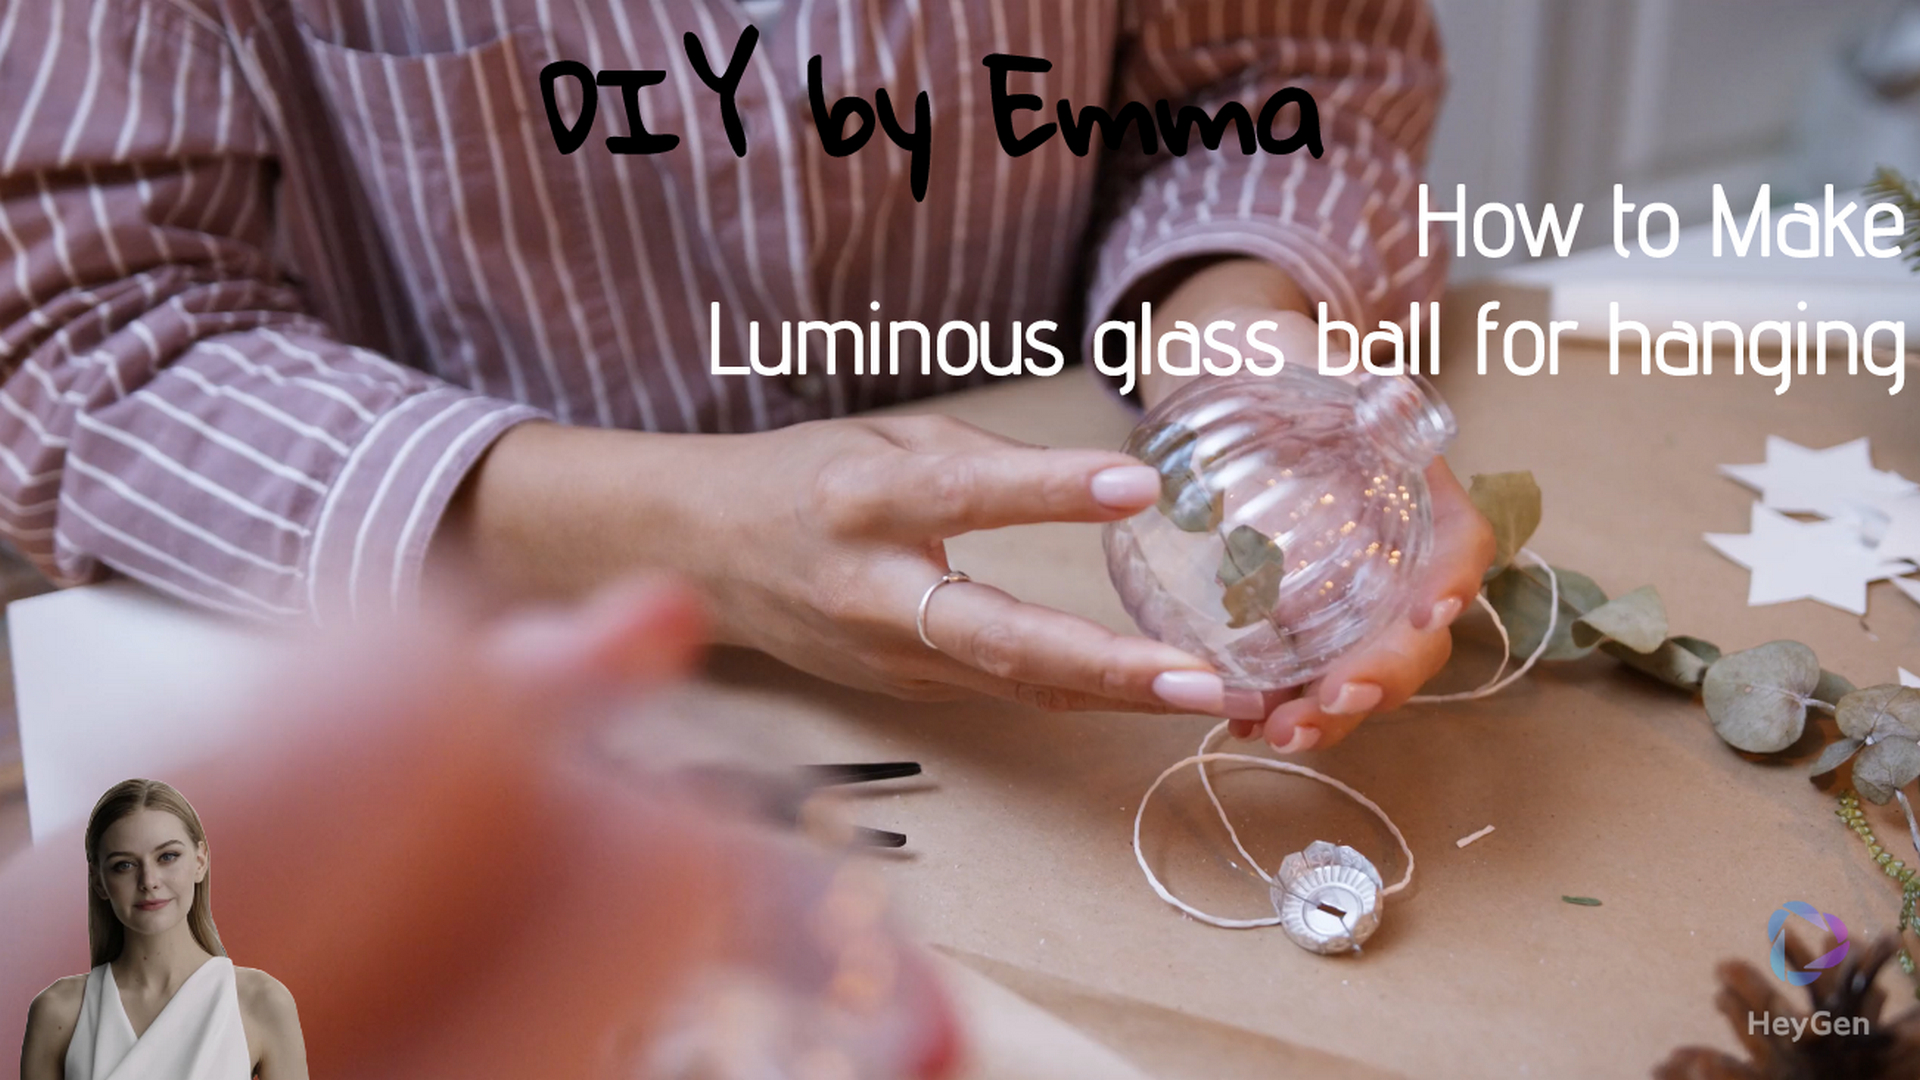 How To Make Luminous glass ball for hanging